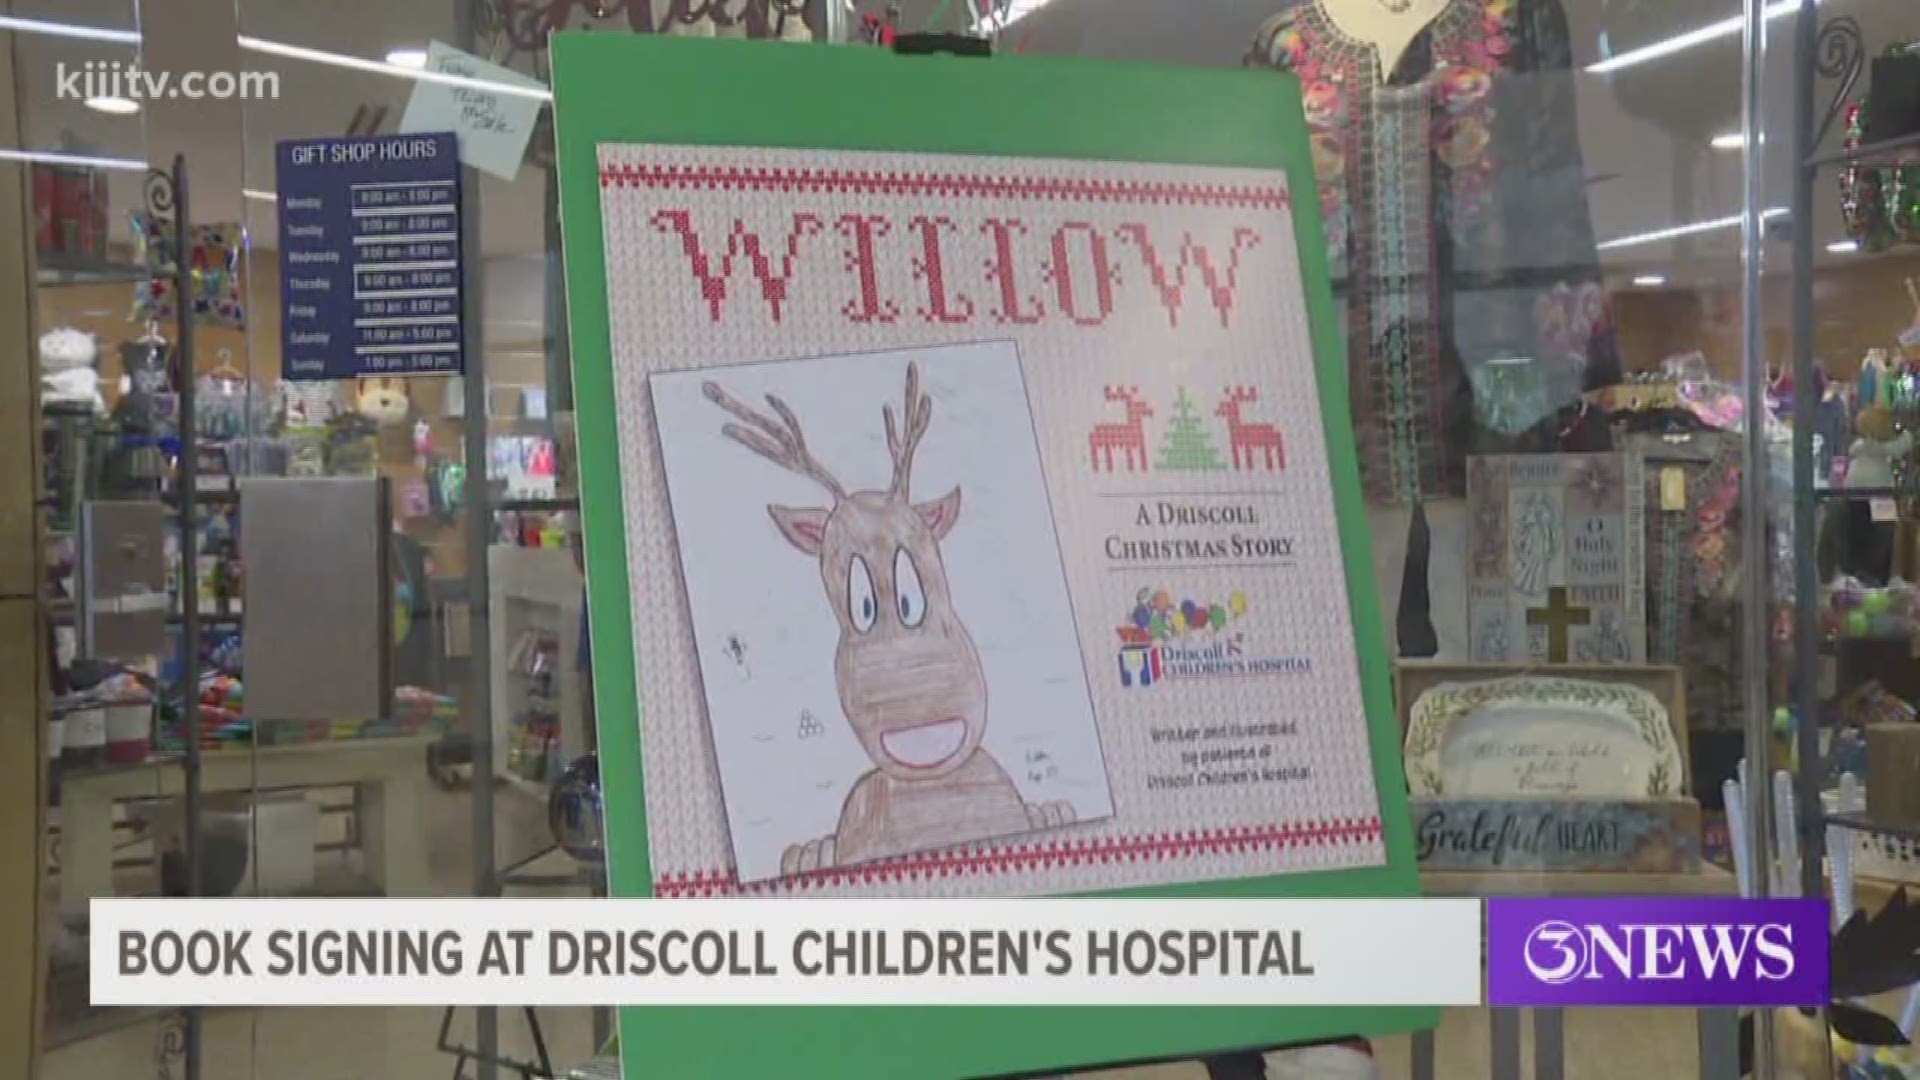 A special event was put on at Driscoll Children's Hospital Monday to get children into the spirit of the holidays.